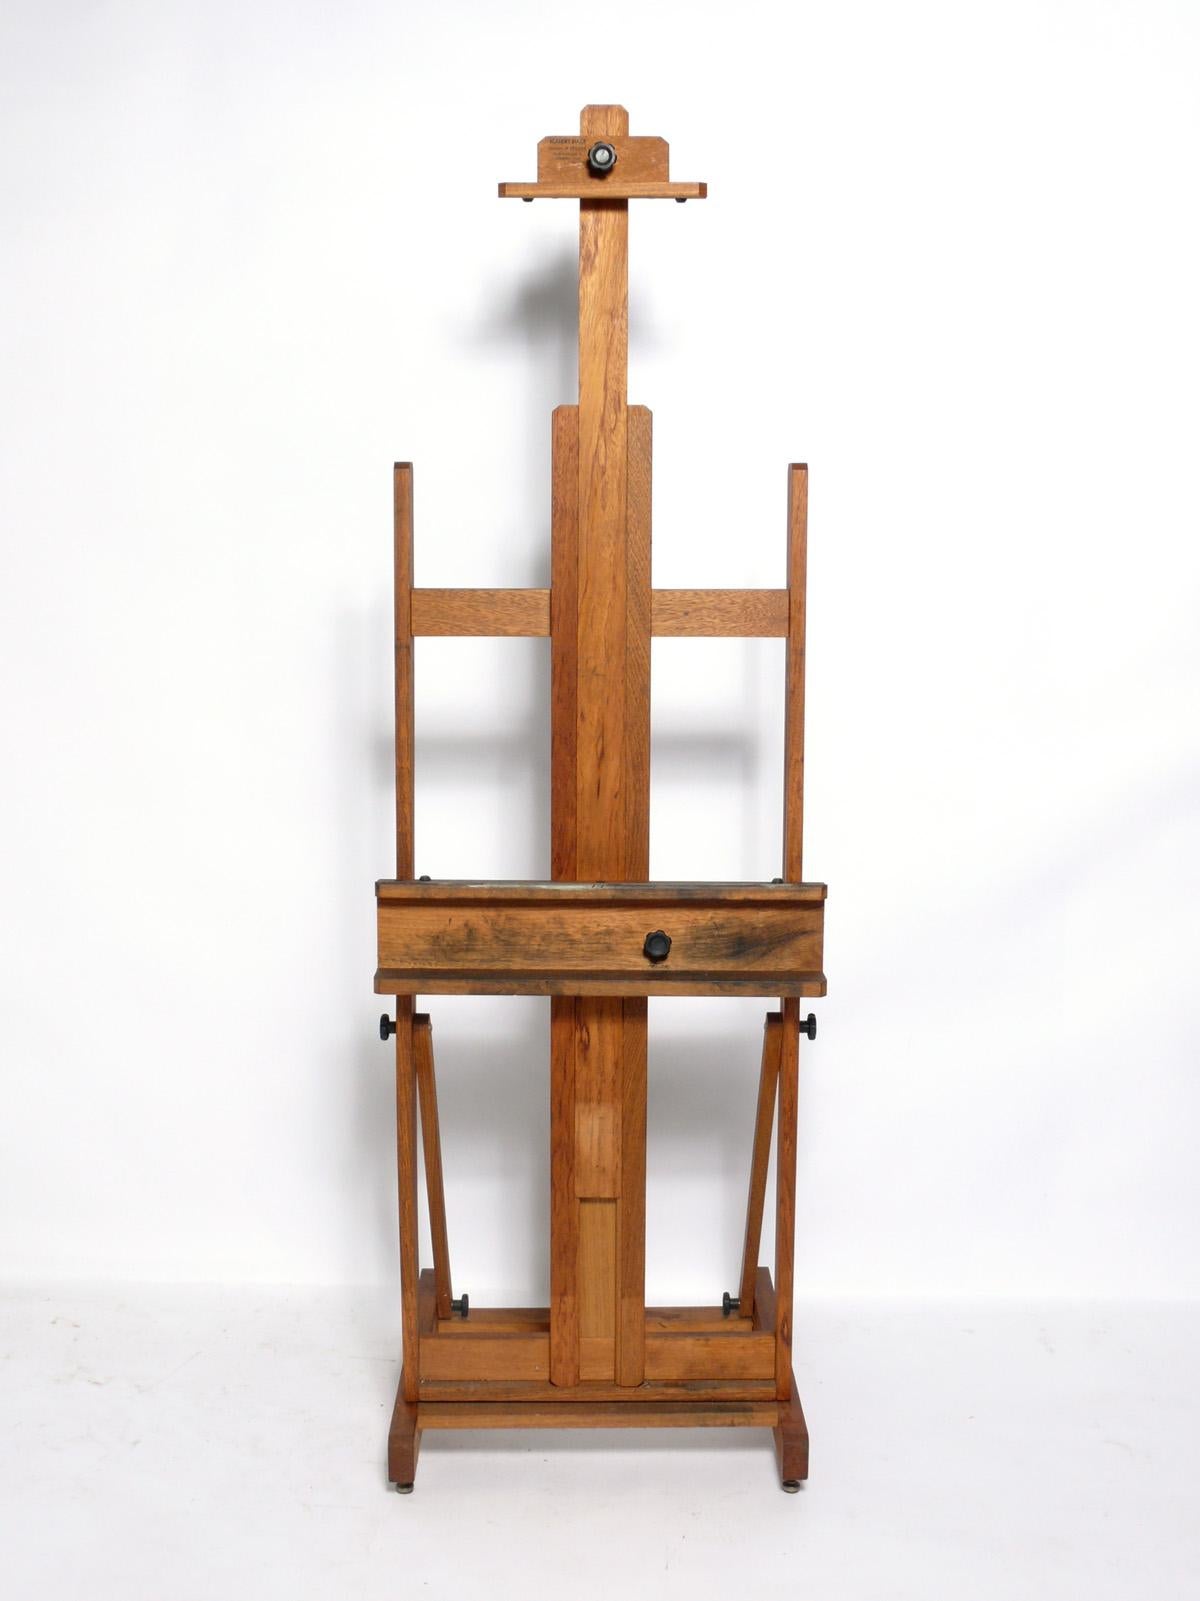 Vintage wood easel, American, circa 1990s. Can be used to display your favorite art or flat screen TV. It can extend to 97